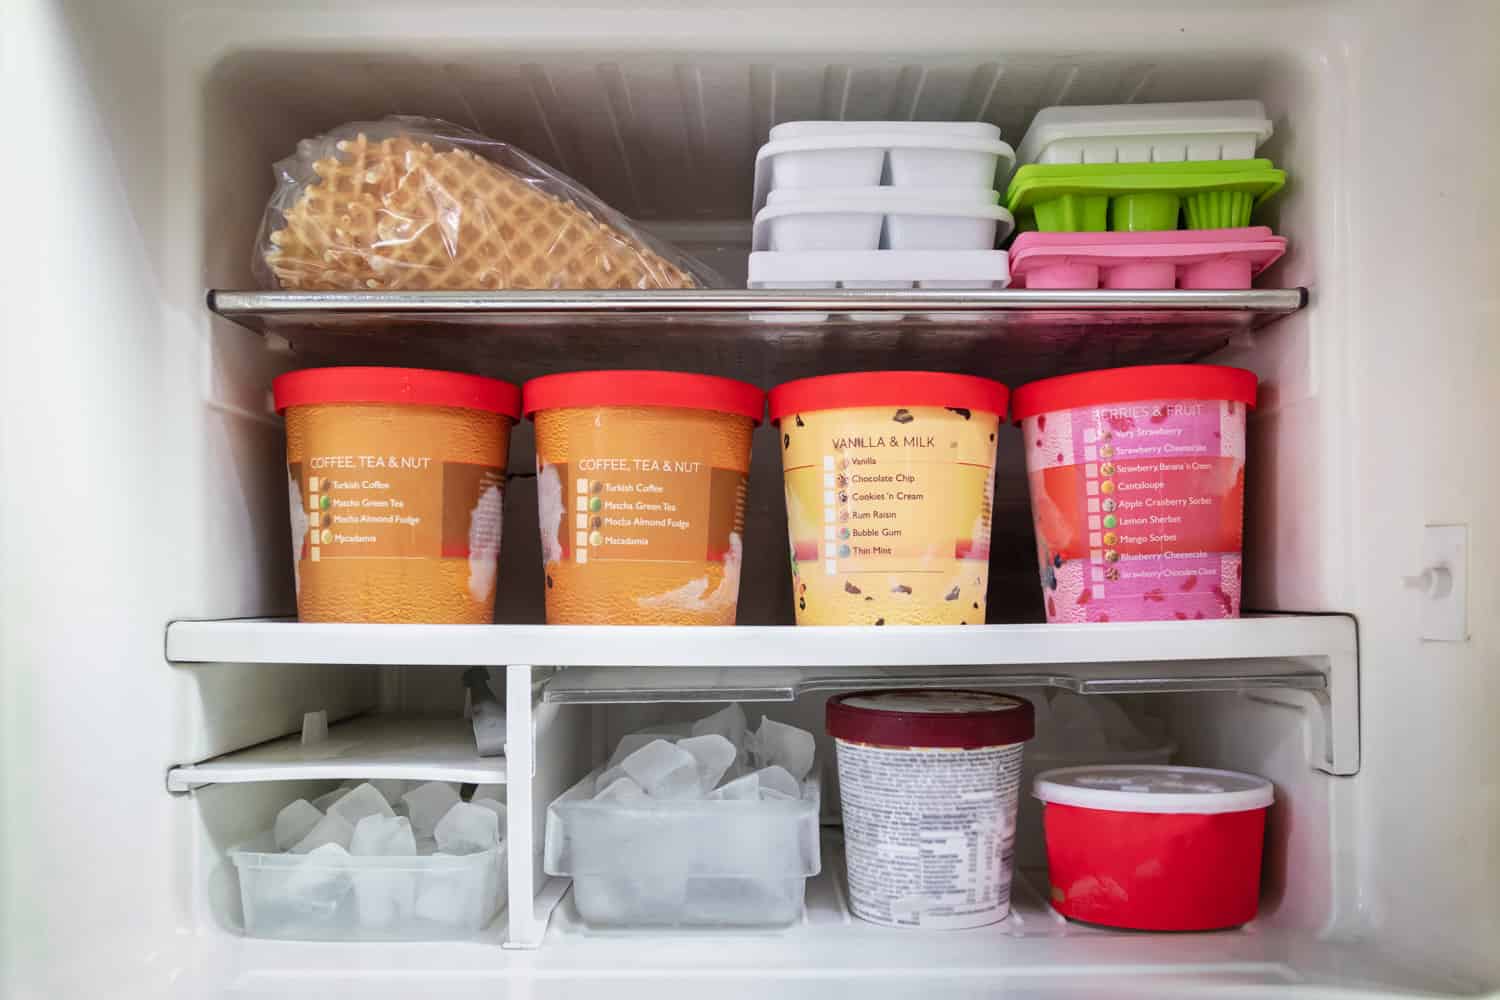 Full of bucket container ice creams flavors and ice cubes in freezer.